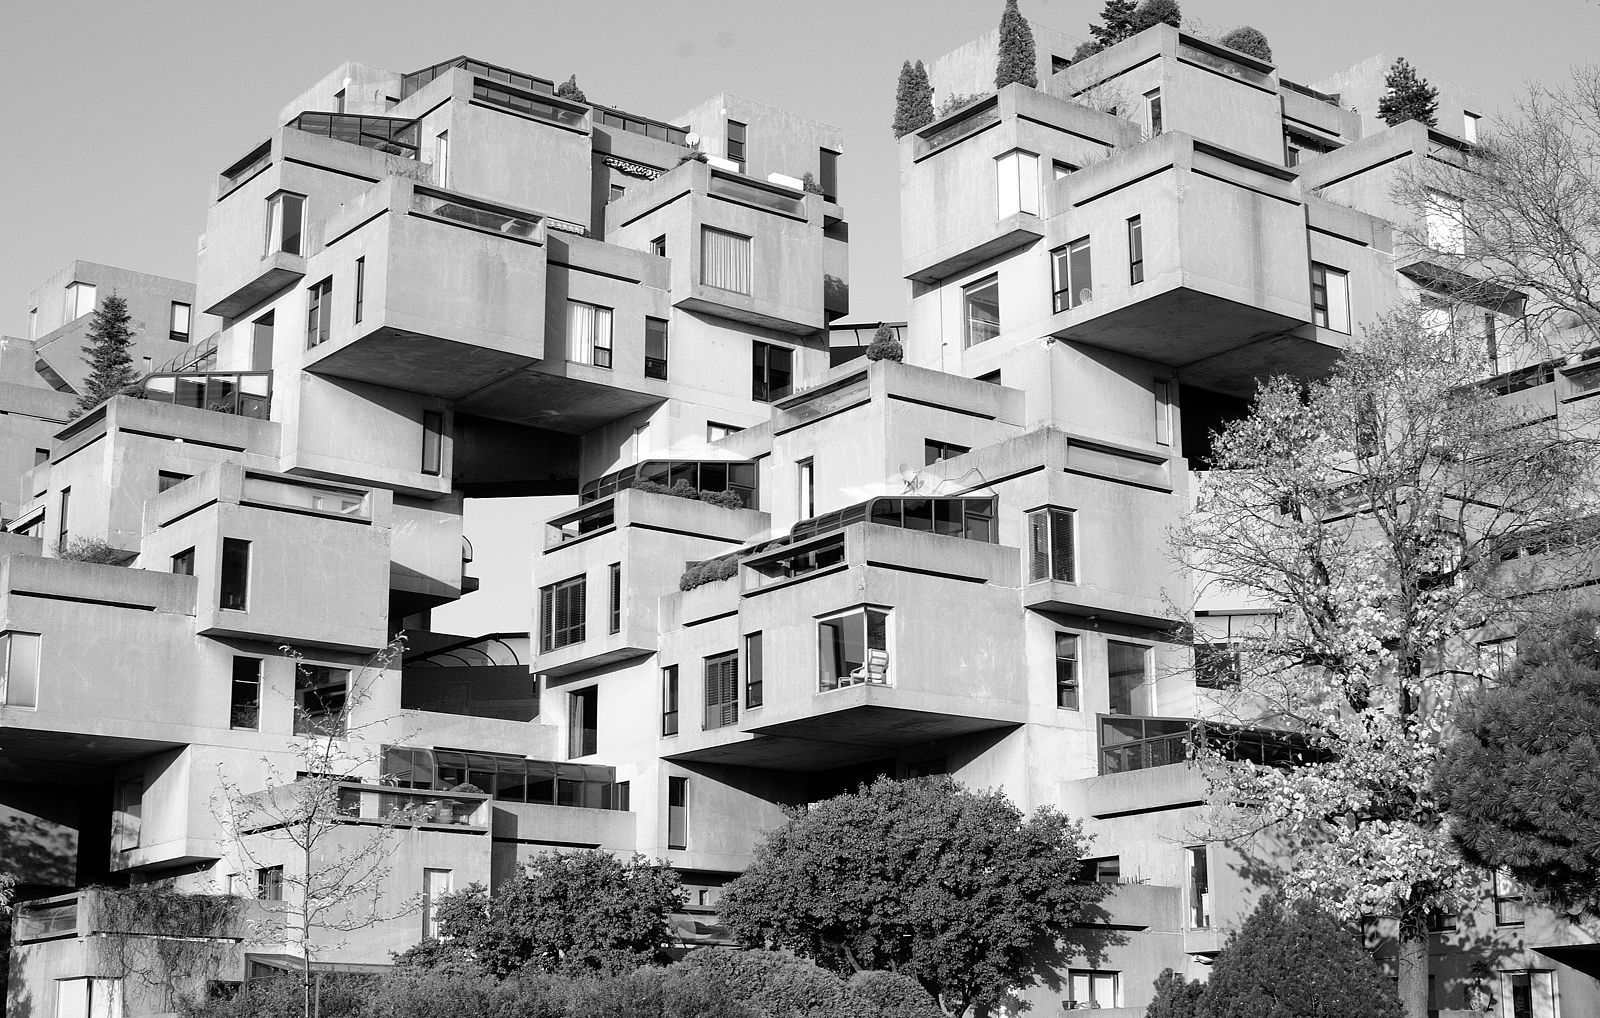 photograph of a portion of Habitat 67